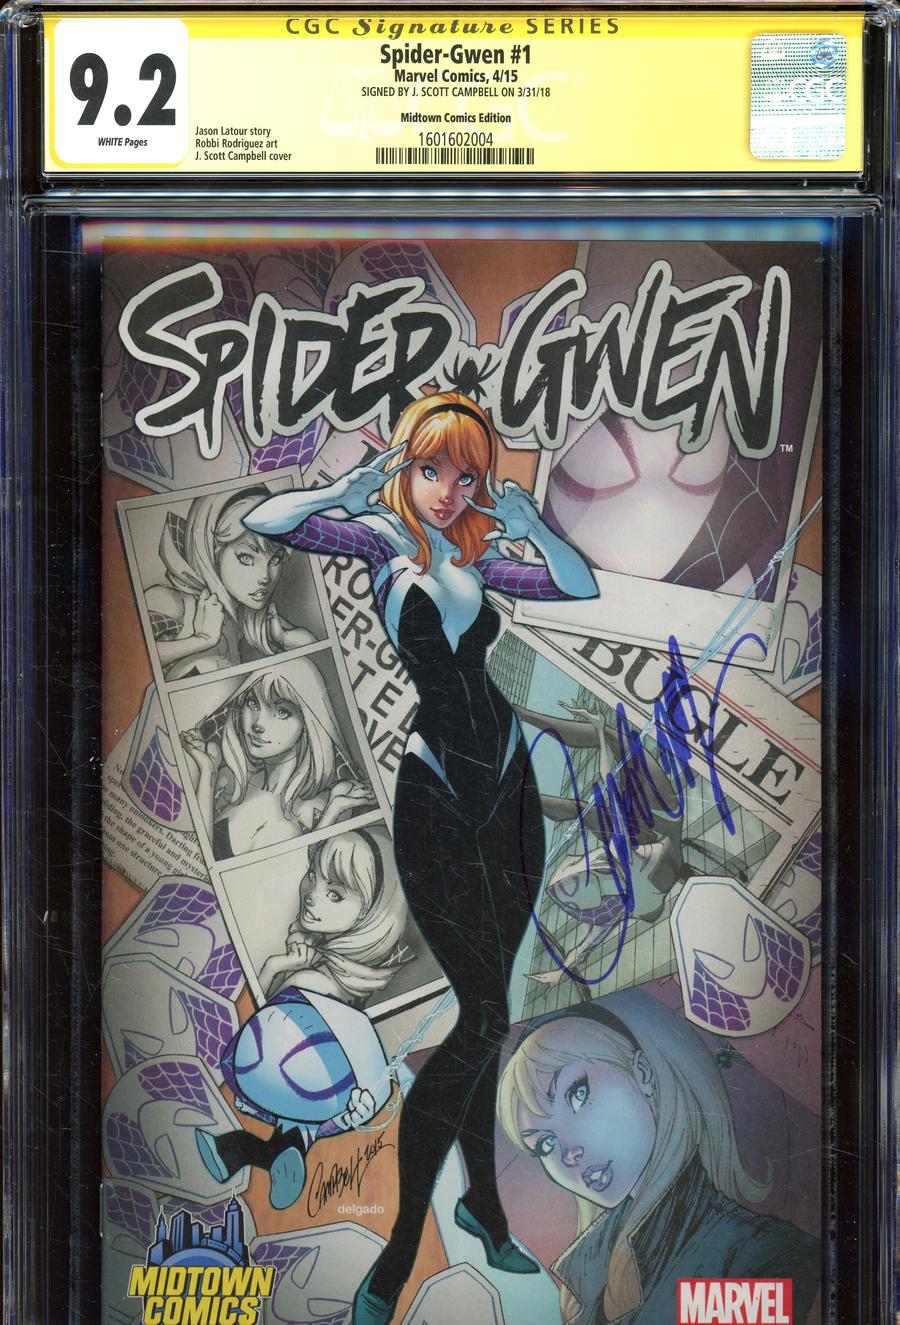 Spider-Gwen #1  Midtown Exclusive J Scott Campbell Color Variant Cover Signed By J Scott Campbell CGC 9.2